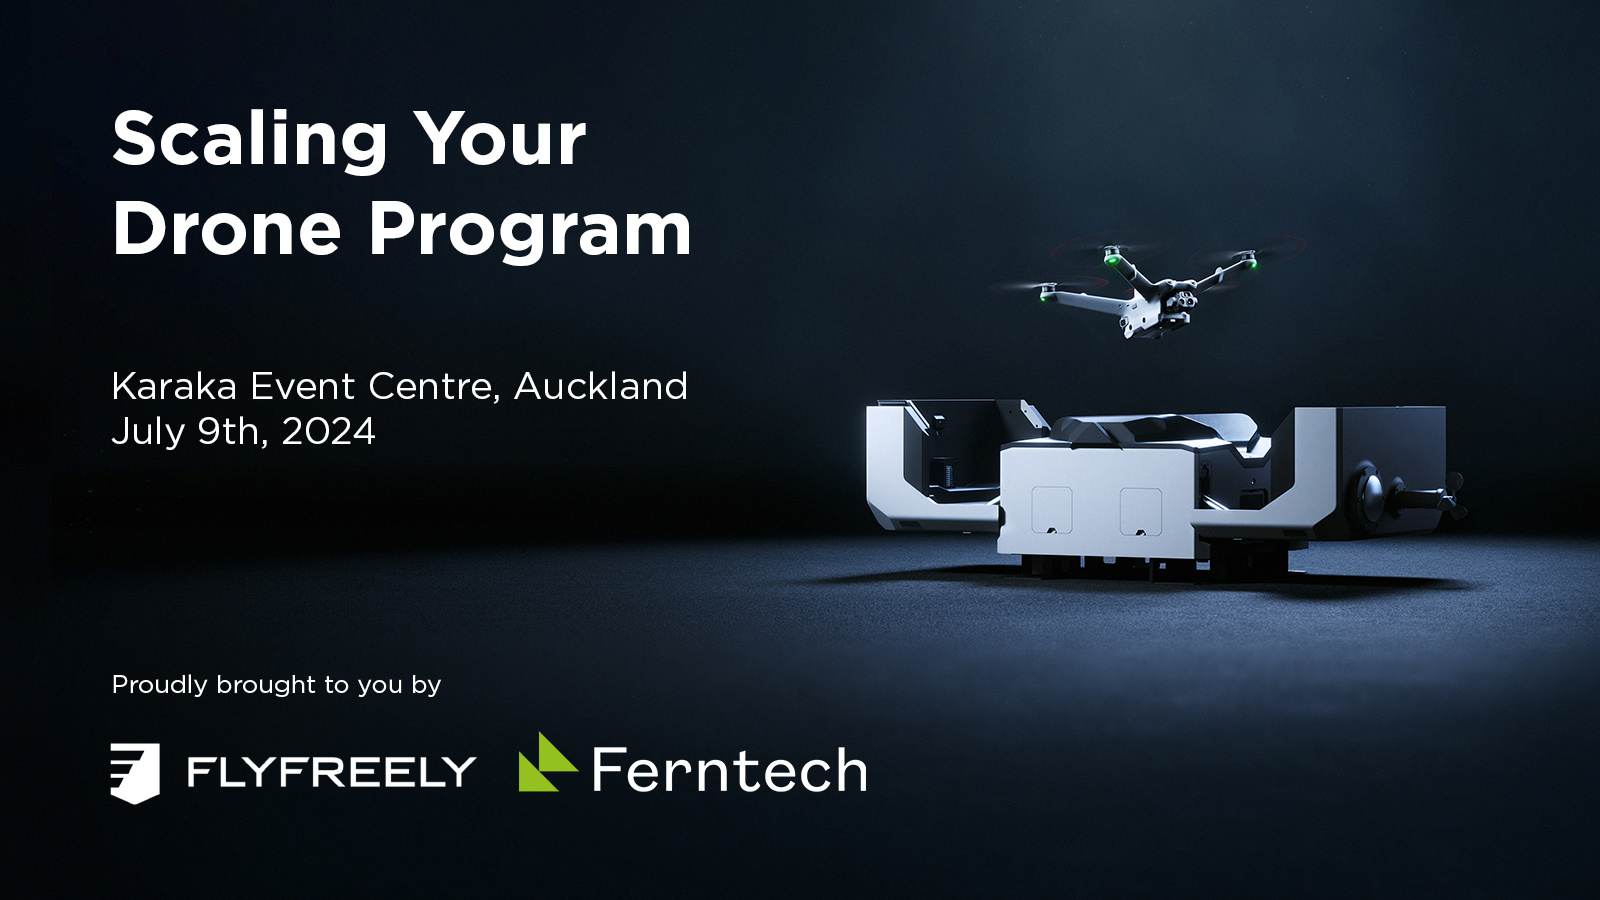 Ferntech-FlyFreely-Scaling-Your-Drone-Program-Event-1600x900